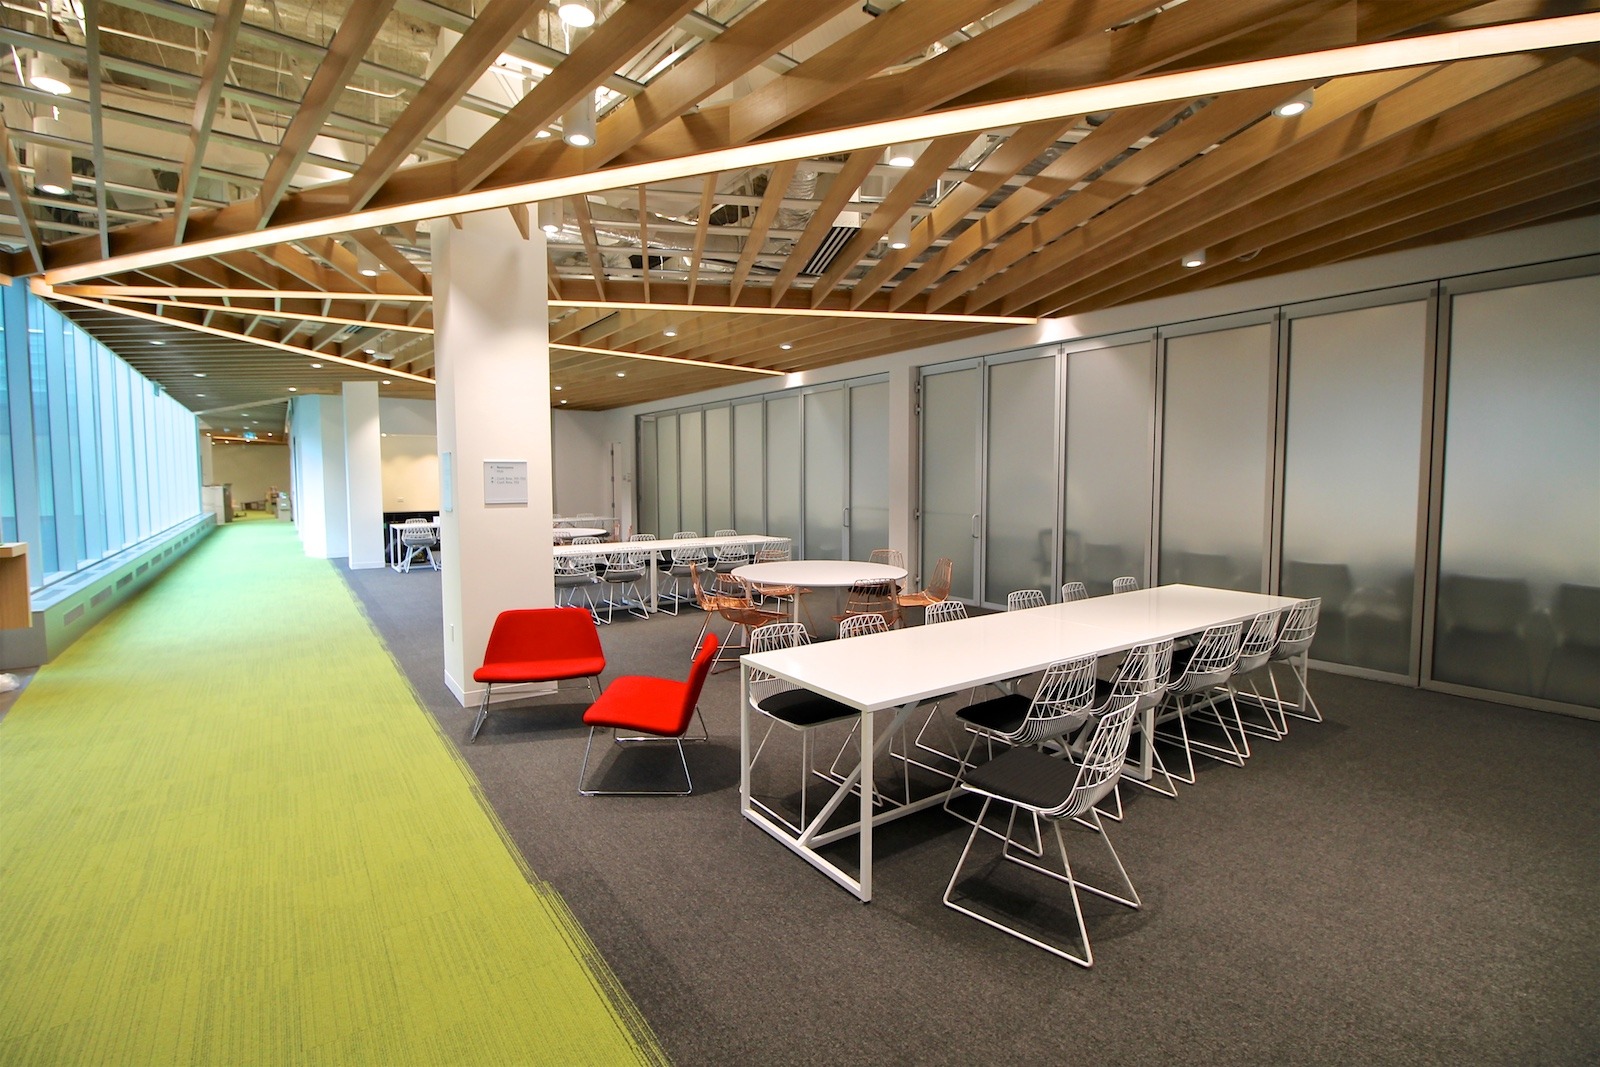 IBM Vancouver Office - Office Interiors. Completed 2013  Office Interiors: Microsoft Excellence Centre. Completed March 2016